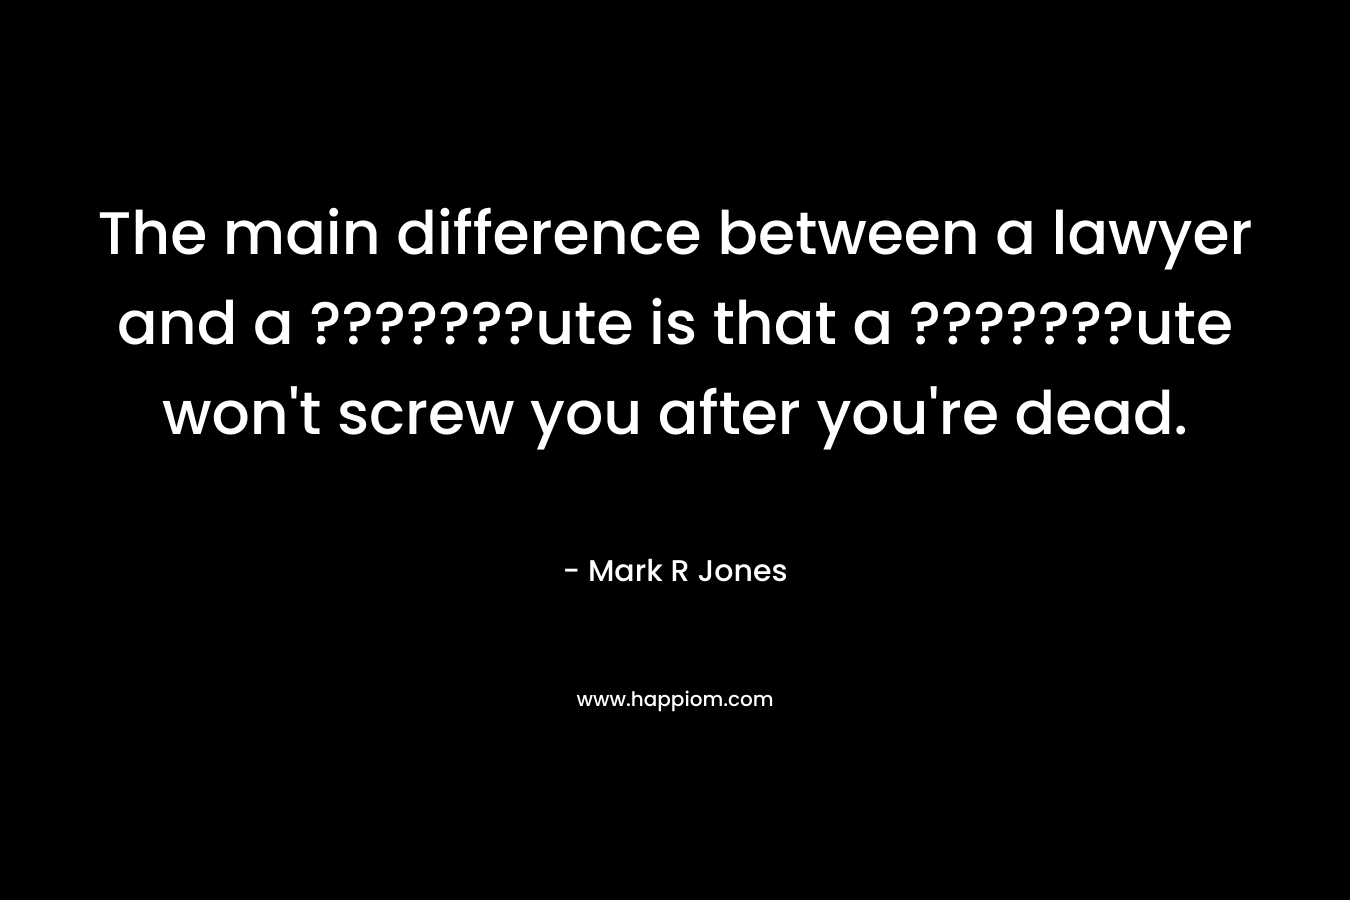 The main difference between a lawyer and a ???????ute is that a ???????ute won’t screw you after you’re dead. – Mark R Jones